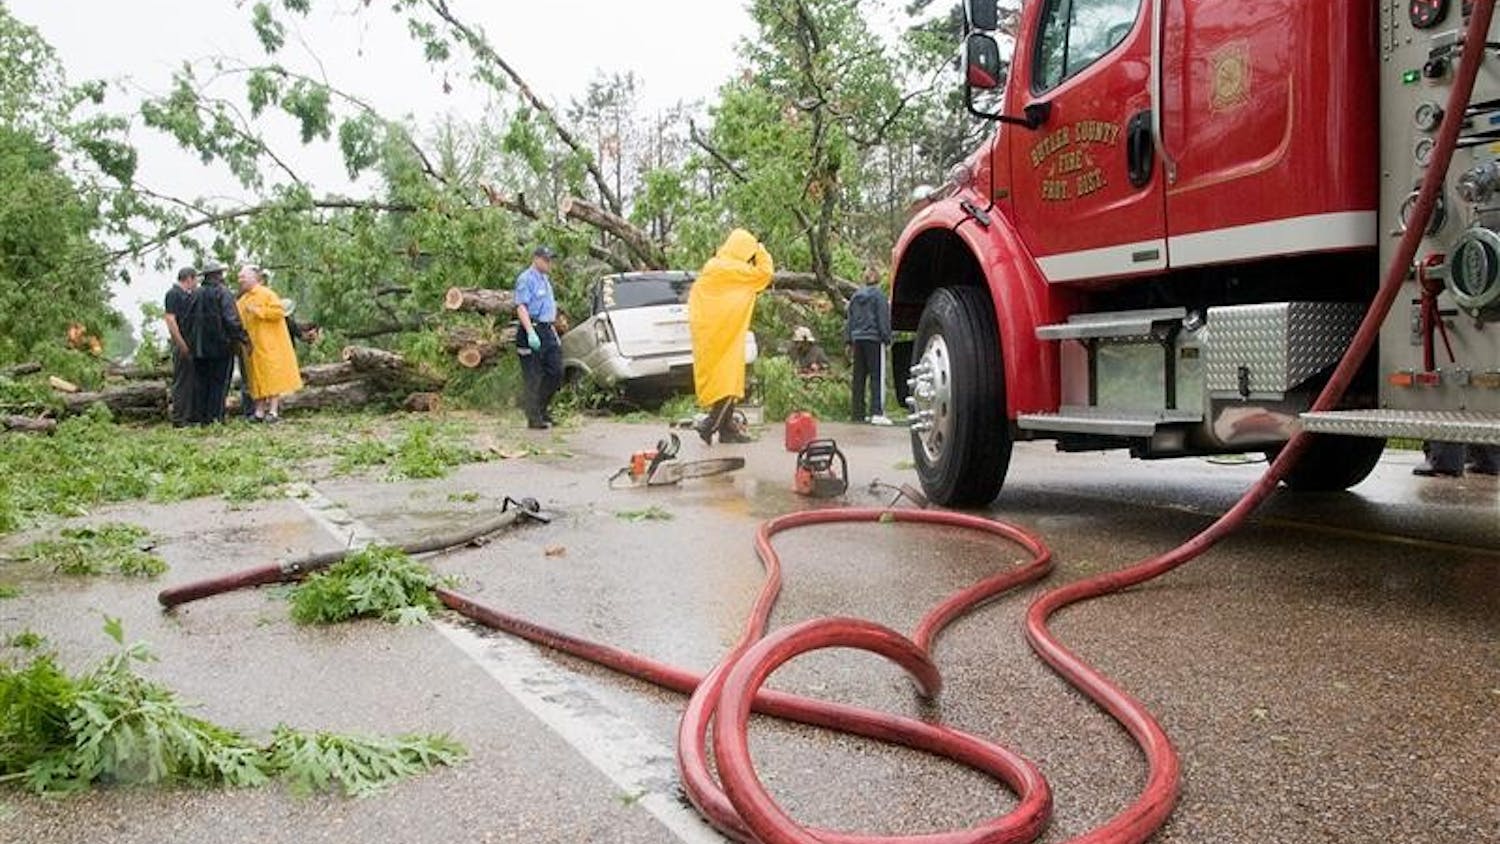 Emergency crews from the Missouri State Highway Patrol, Butler County and Poplar Bluff clean up the scene of an accident on Missouri Highway 53, about three miles south of Poplar Bluff, Mo., Friday. The vehicle was traveling south when gusty storm winds apparently uprooted a large oak tree, which fell on the vehicle, killing both occupants.